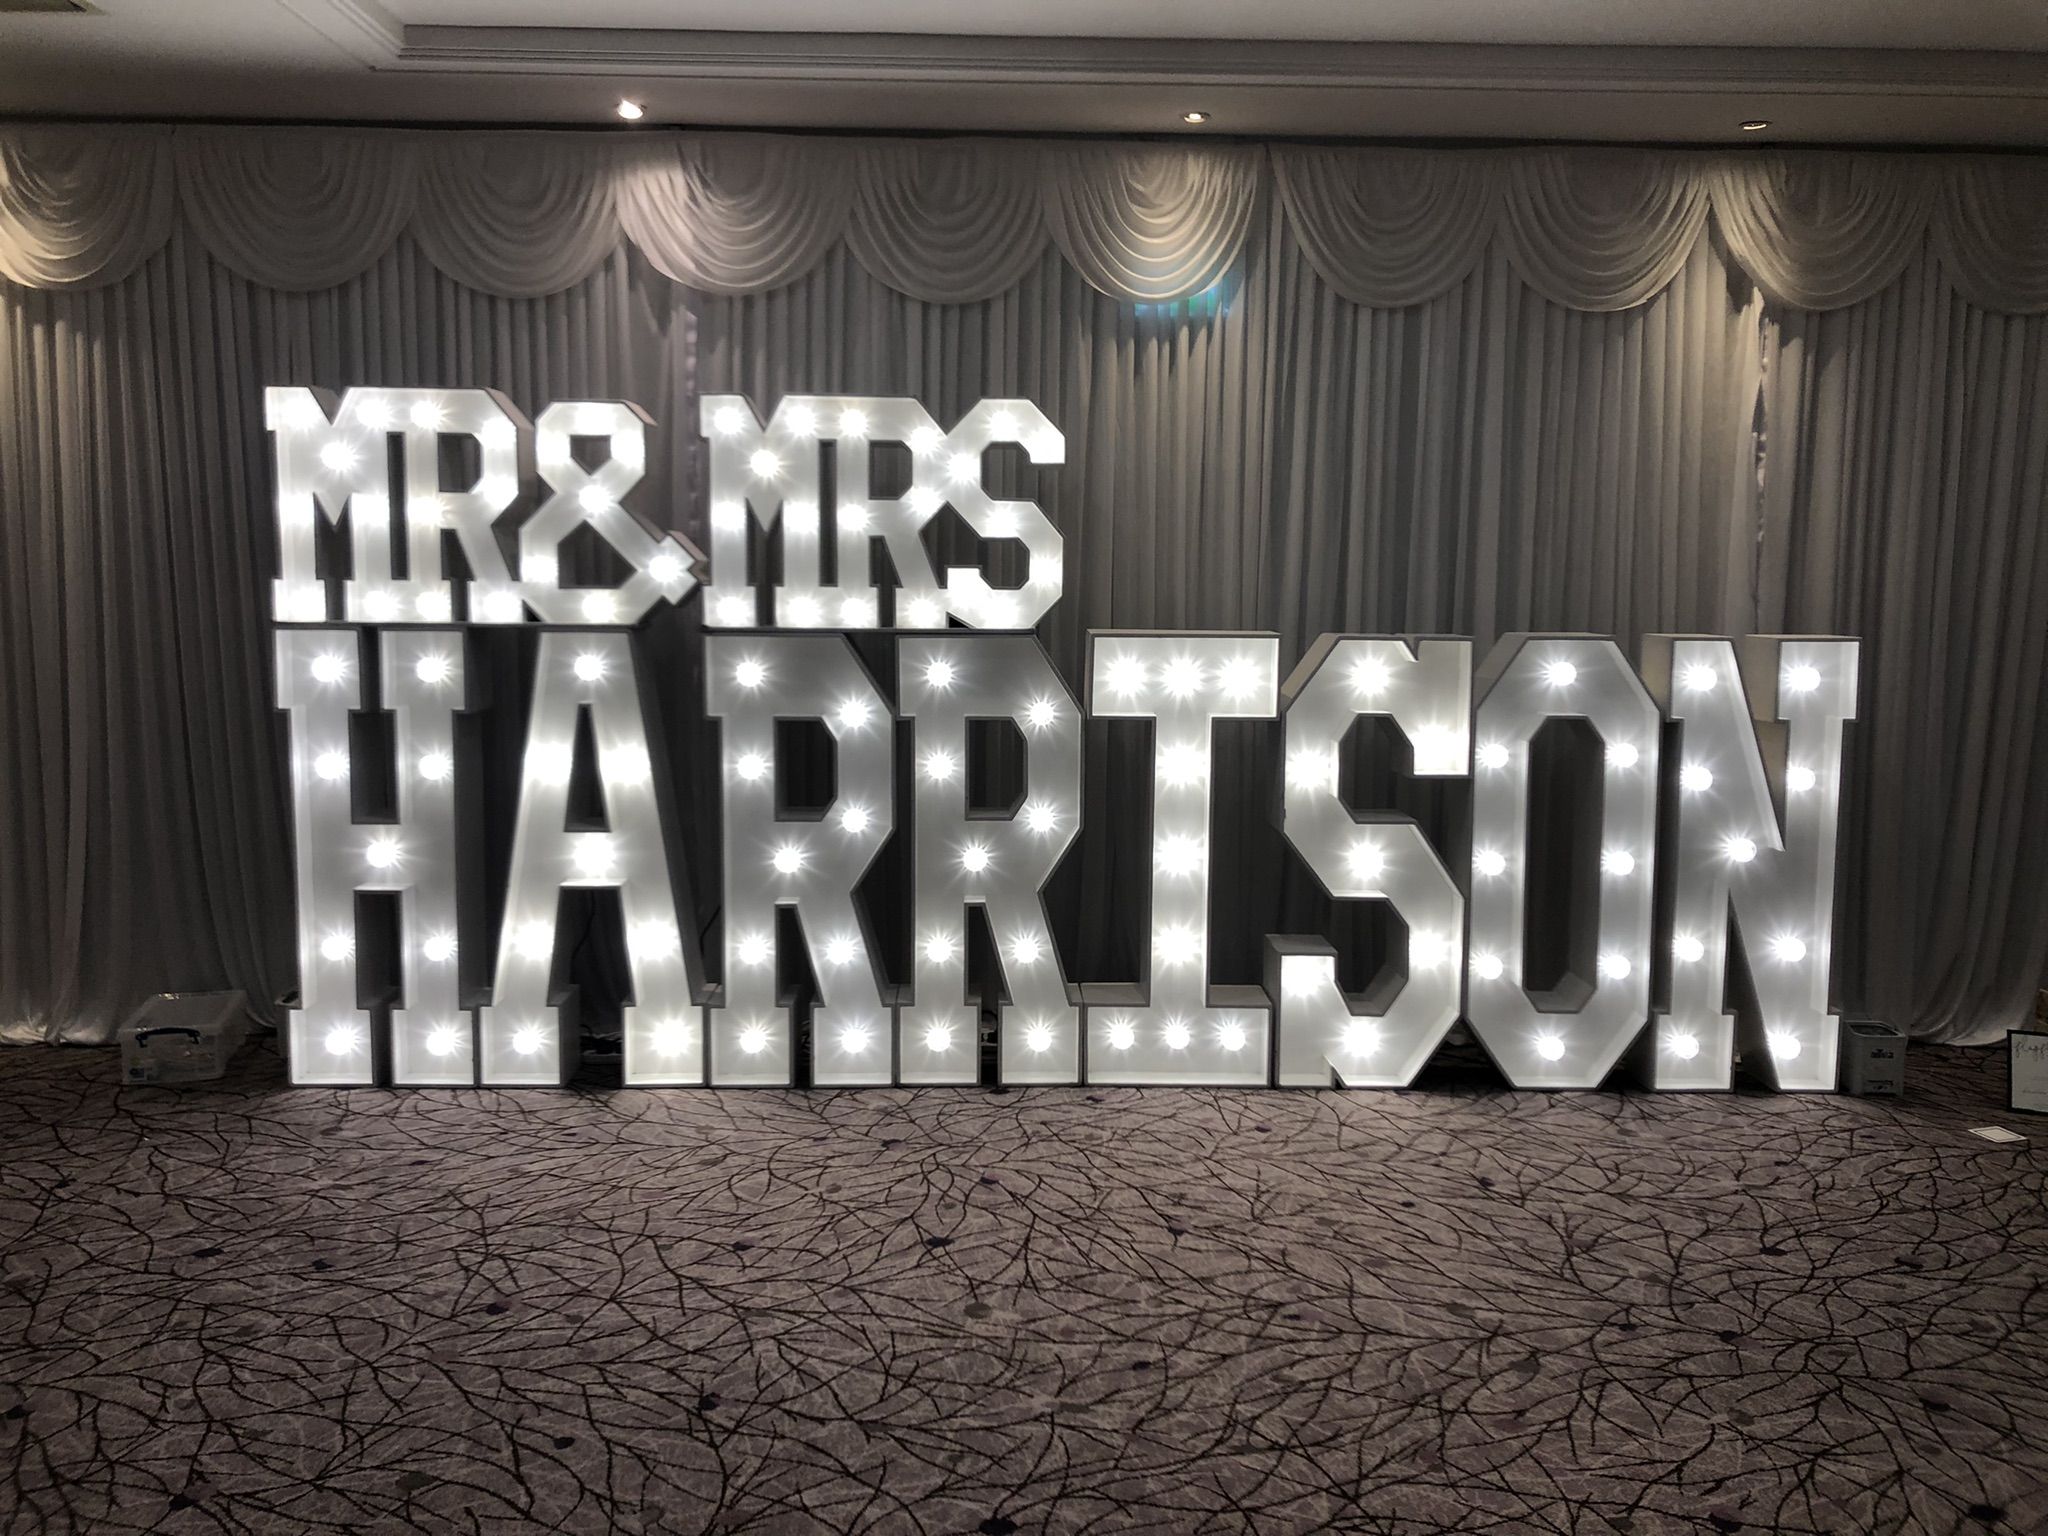 a large marquee sign that says mr and mrs harrison.